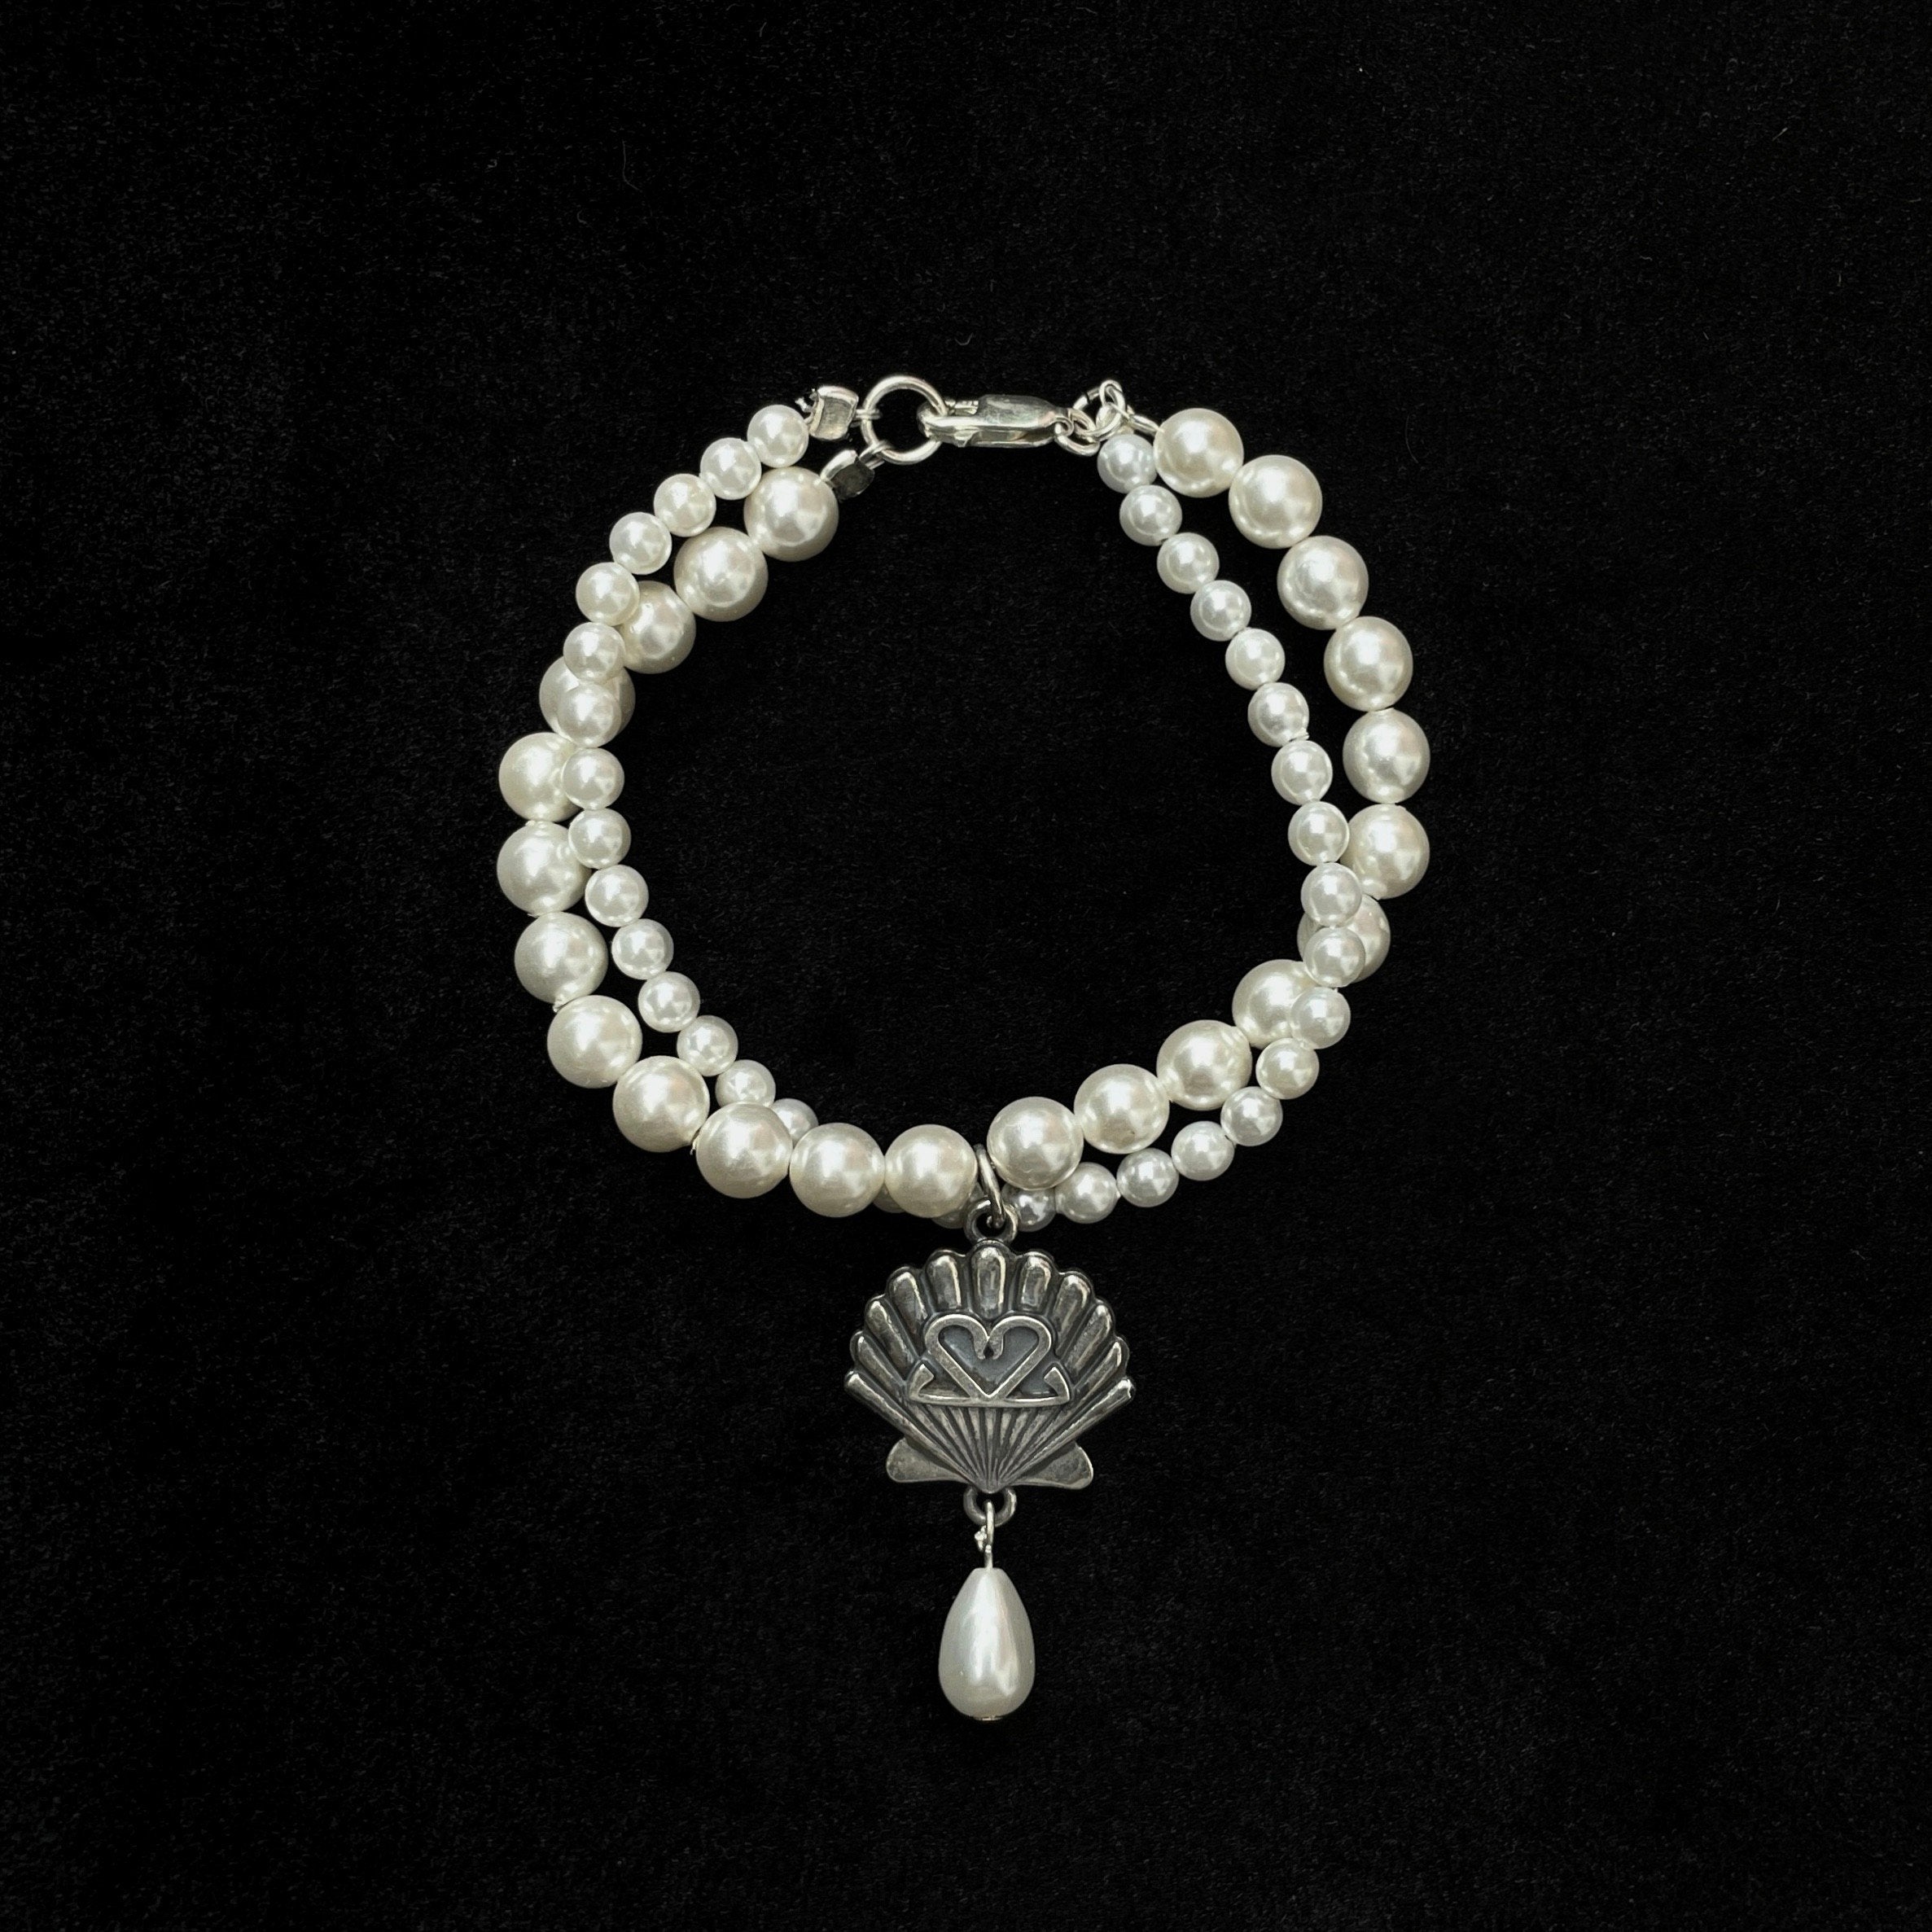 2AB's Iconic Pearl Bracelet - 925 Sterling Silver